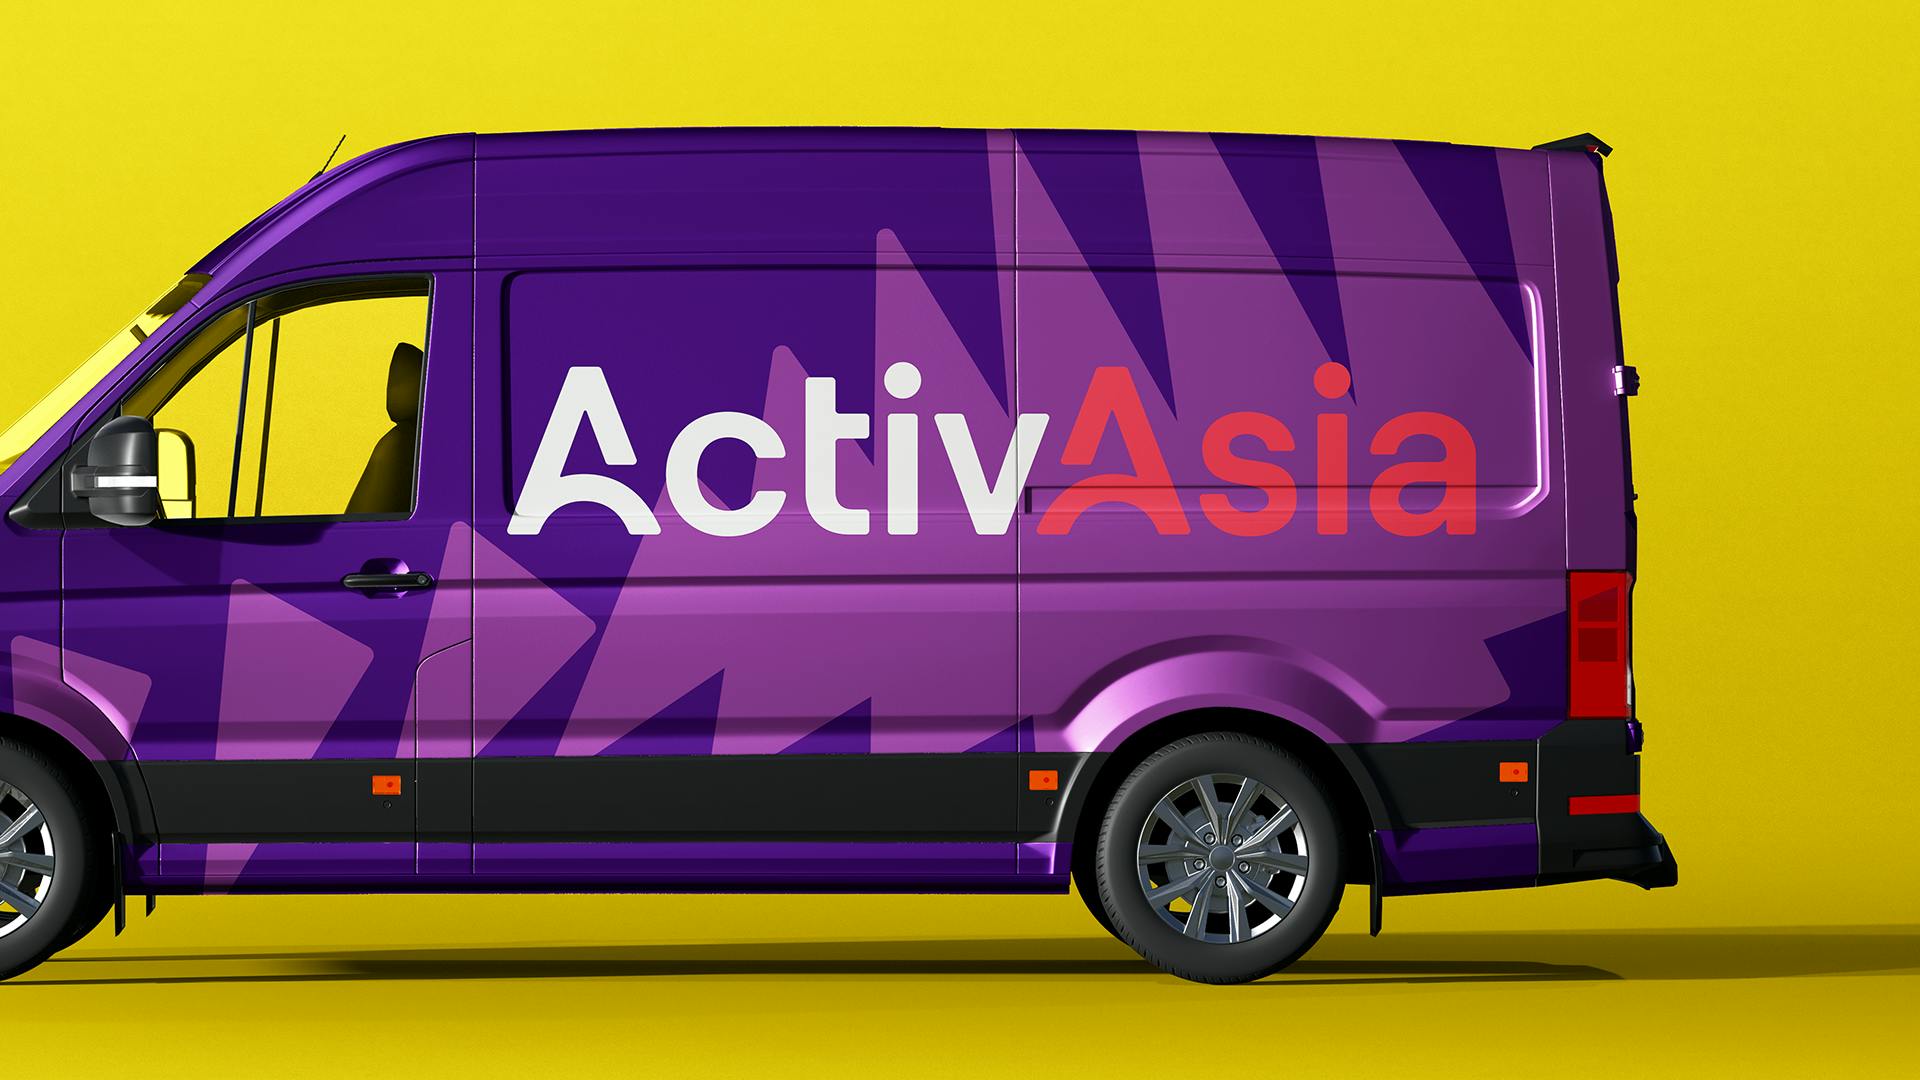 ActivAsia - Truck Mockup - Scaled.png